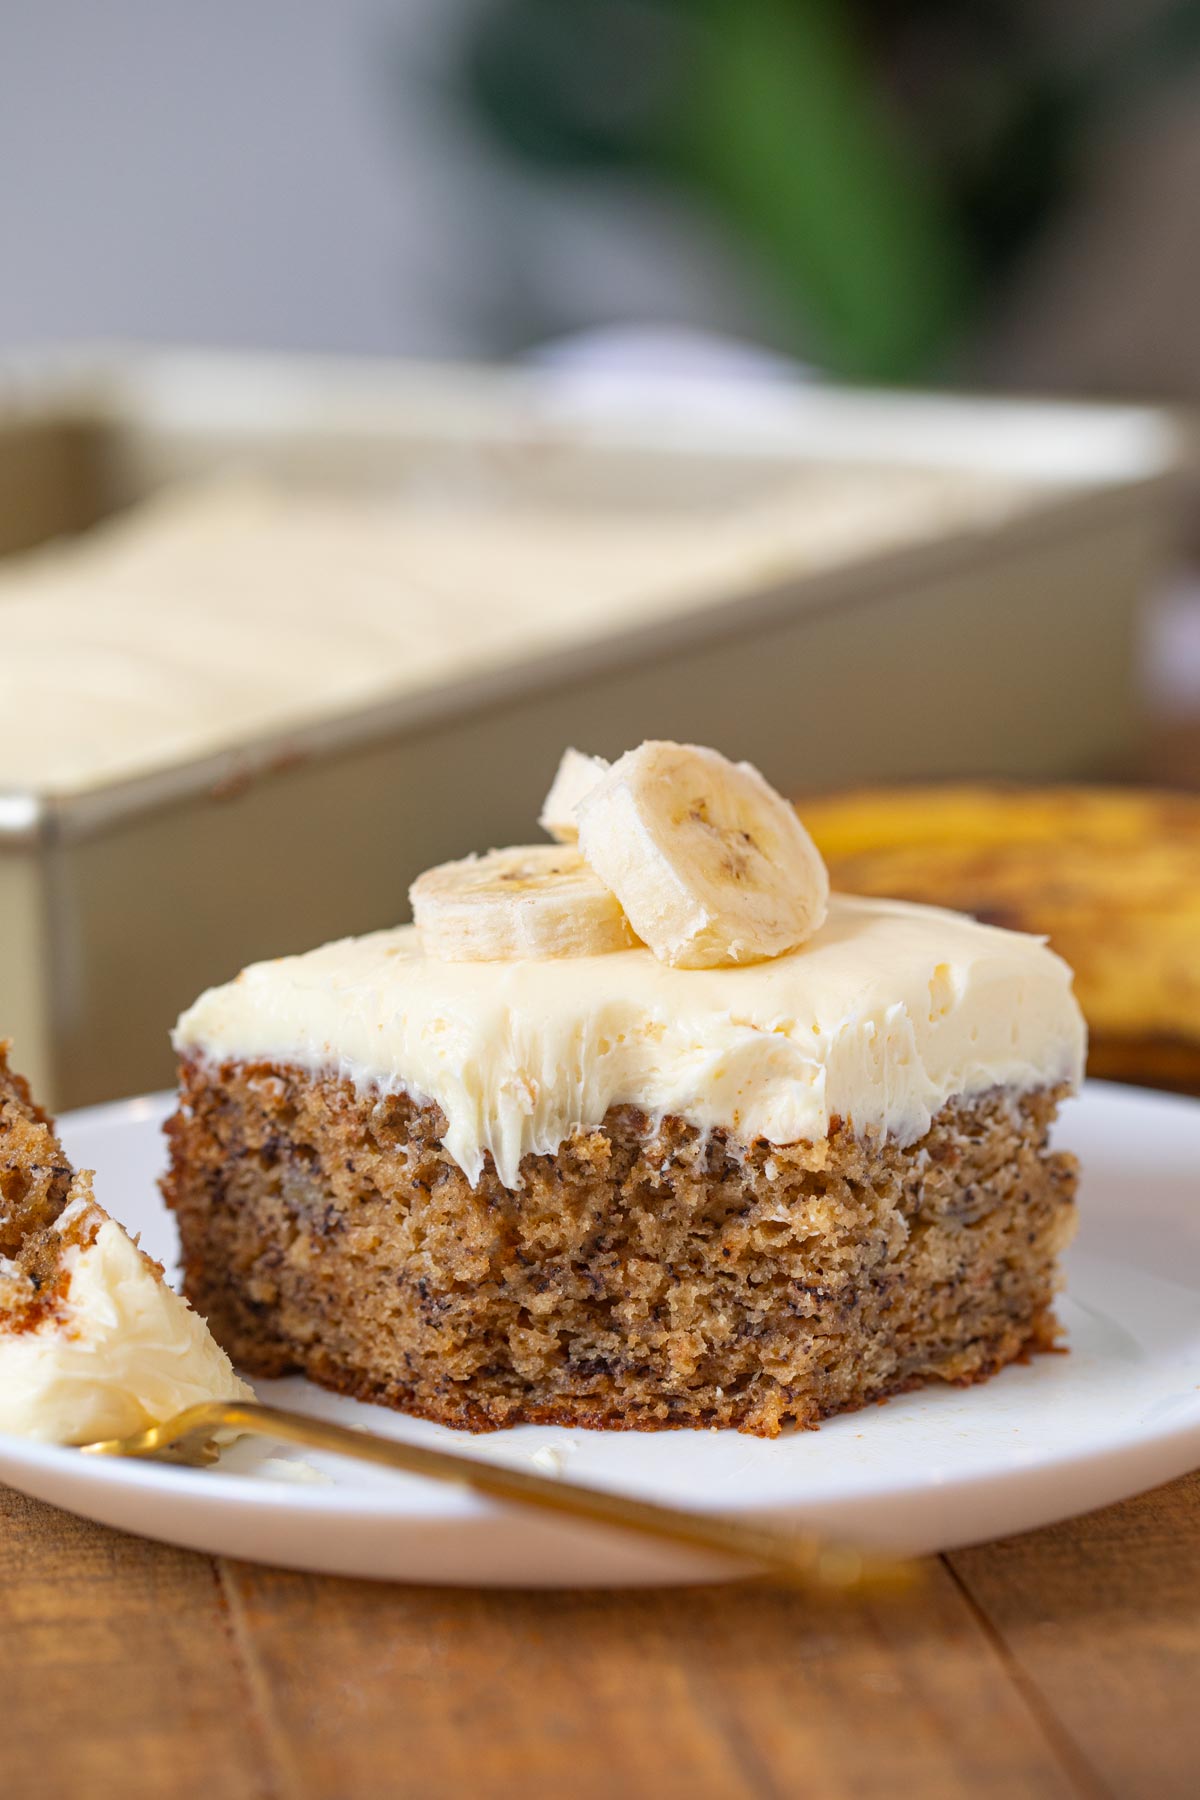 Slice of Banana Cake with frosting and banana slices